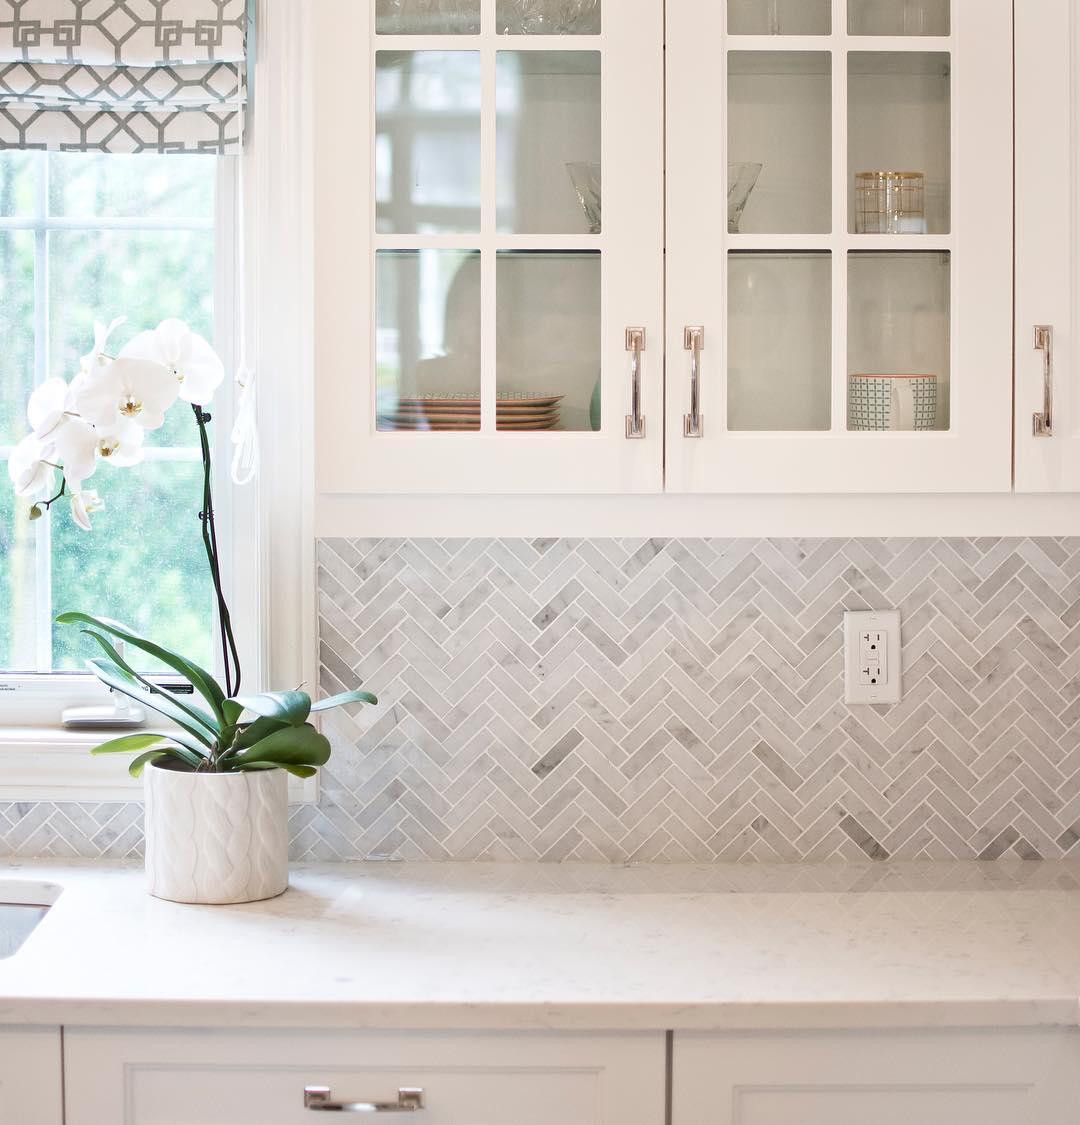 White kitchen cabinets with glass doors.Photo by Instagram user @erin_interiors